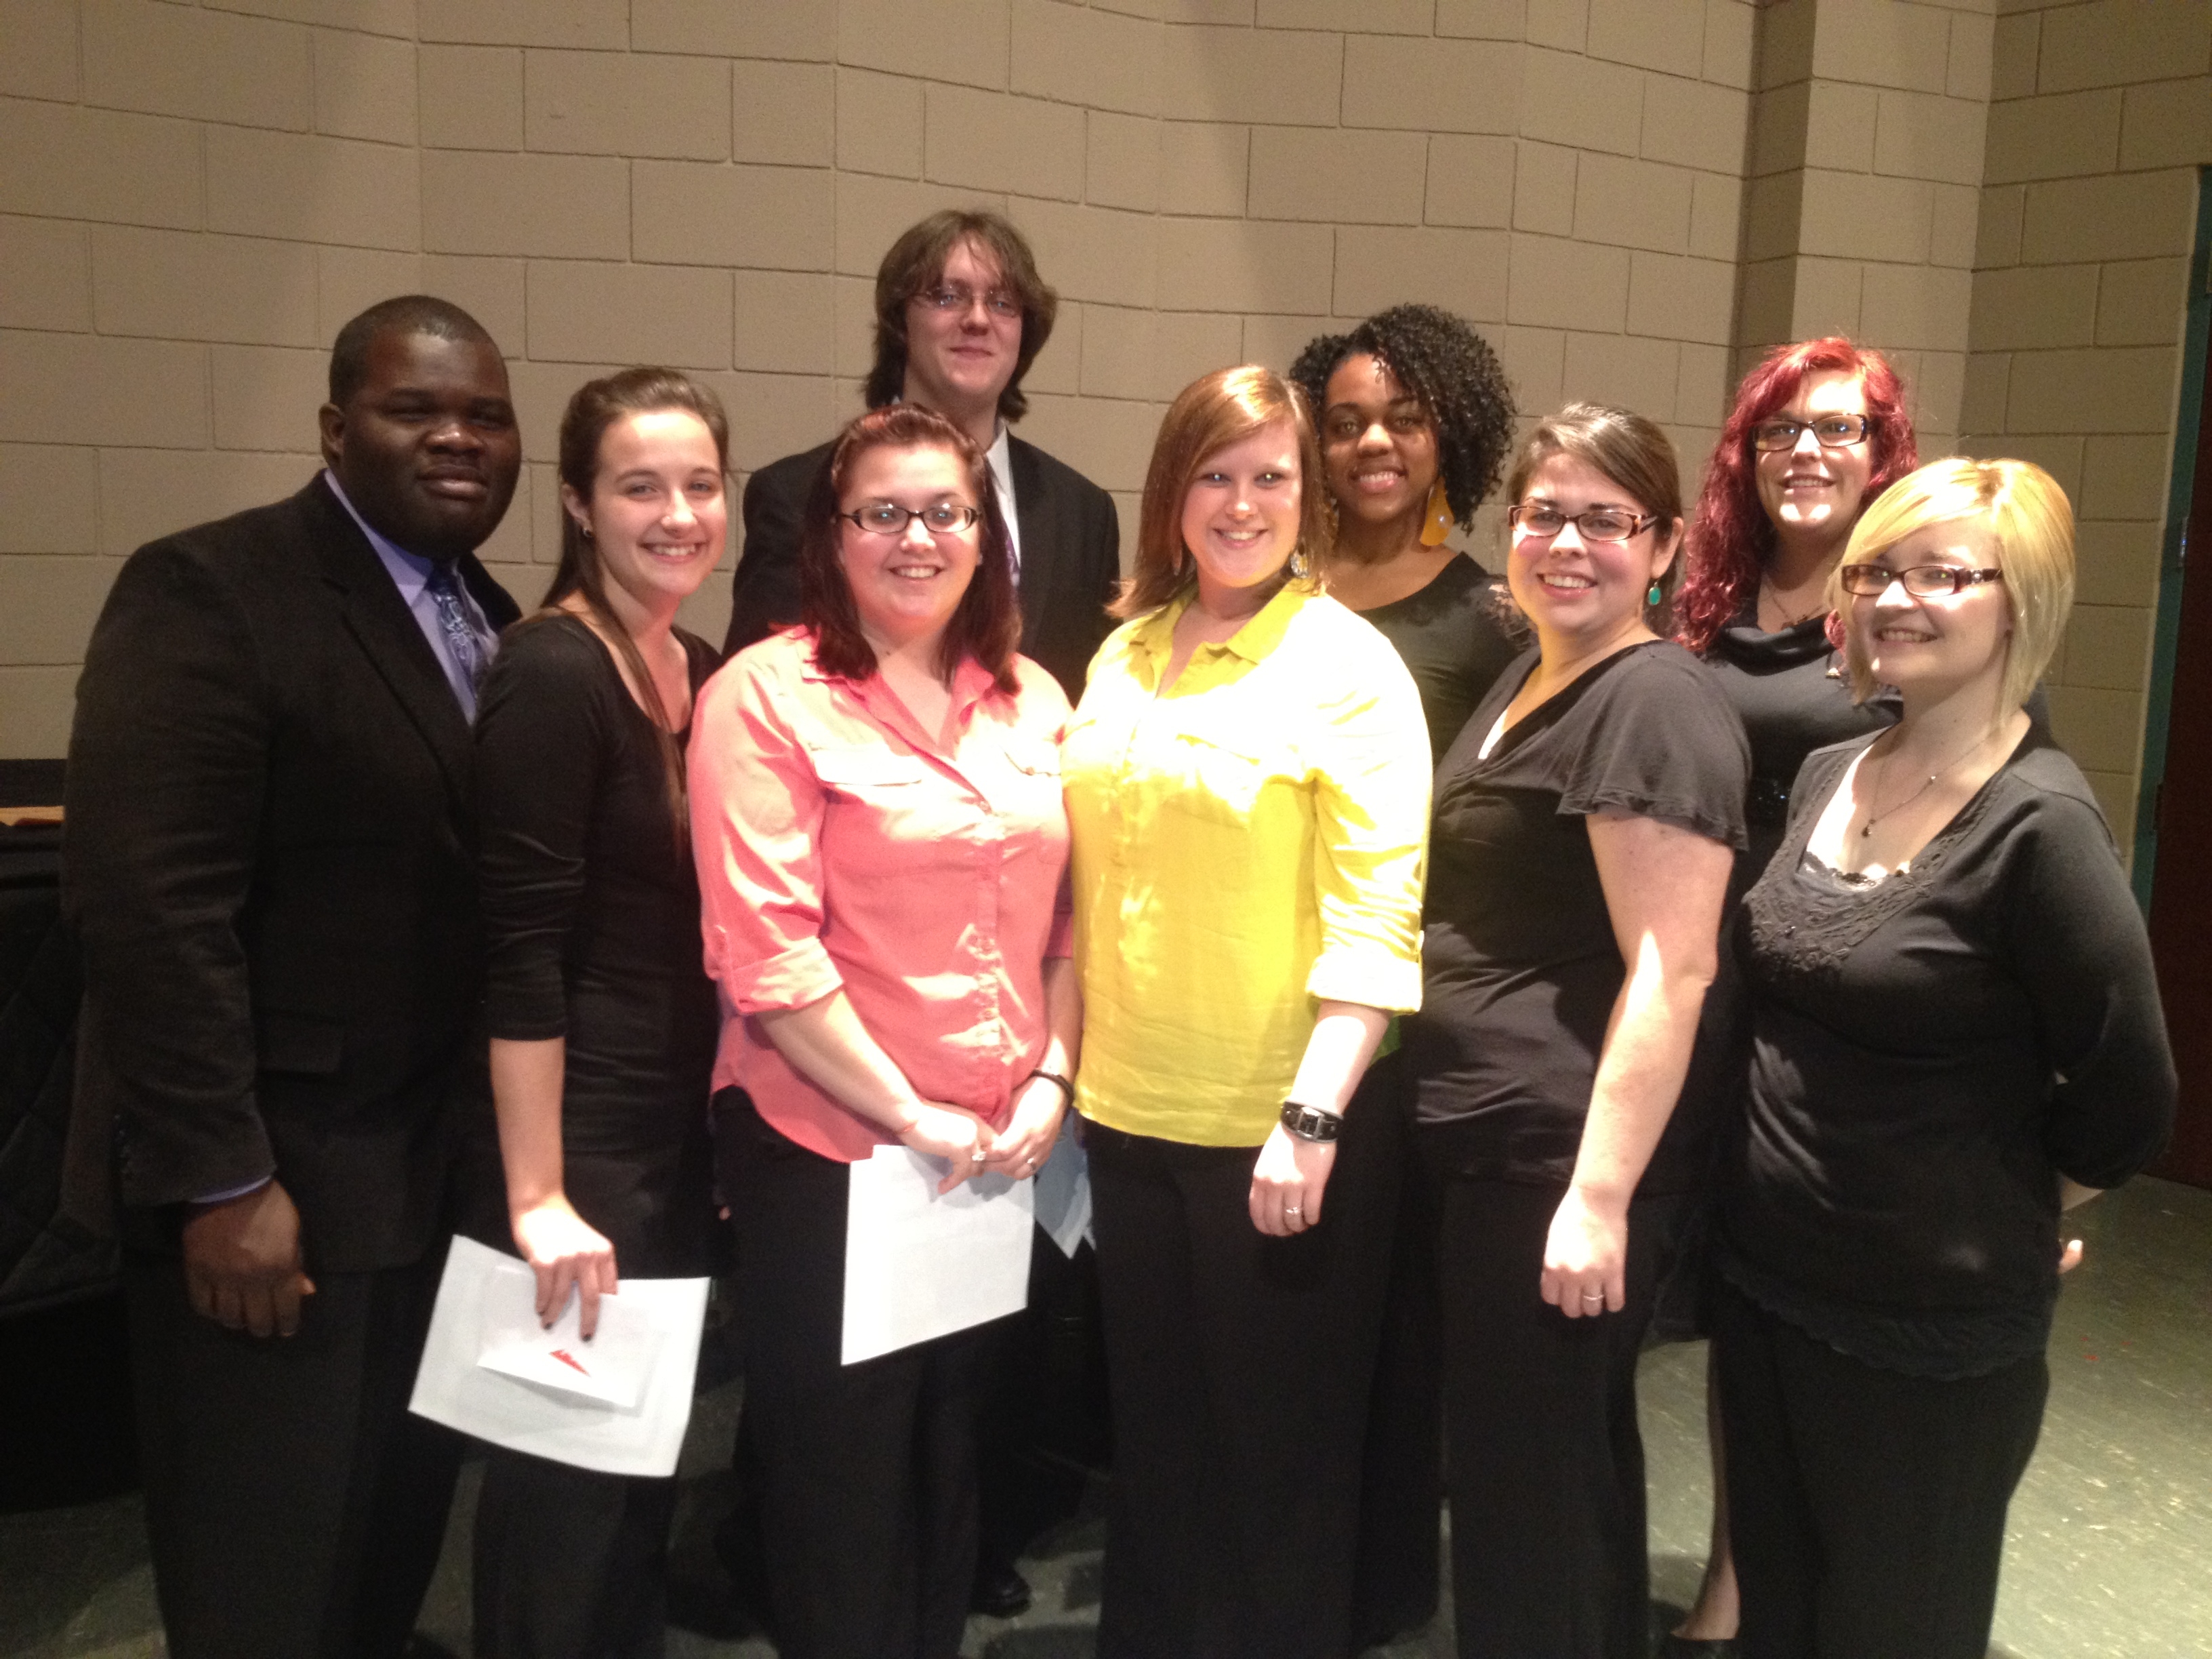 Photo:  Competition Winners - Front row, from left, Darius Jones, Jessica Egdorf, Tirzah Simmons, Courtney Weir, Amanda Corkran, Lindsey Belton. Back row, from left, Kyle Adair, Robyn Rouse, and Elizabeth Long